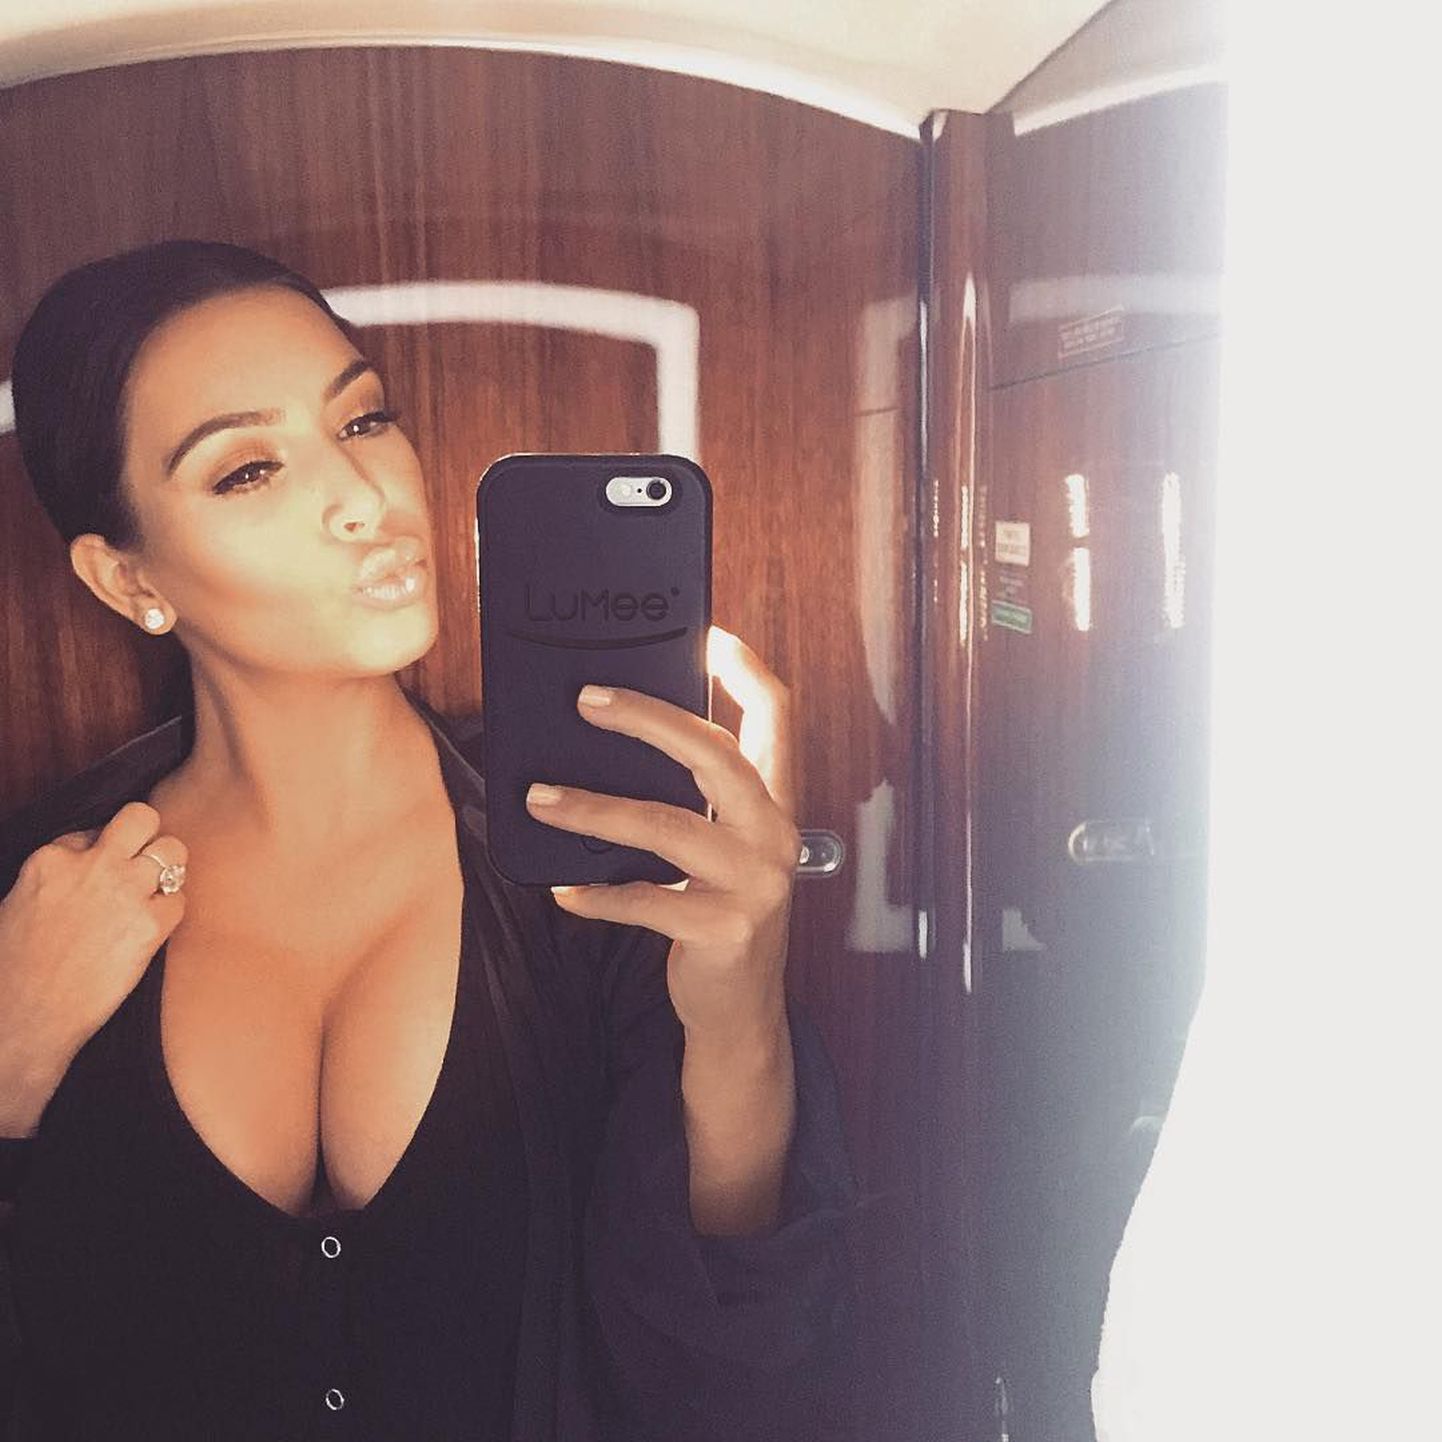 Kim Kardashian releases a photo on Instagram with the following caption: "Selfies about to be LIT! \ud83d\udca1Today on my app I talk about the perfect selfie lighting! The secret to my selfies Lumee.com". Photo Credit: Instagram *** No USA Distribution *** For Editorial Use Only *** Not to be Published in Books or Photo Books *** Handling Fee Only ***